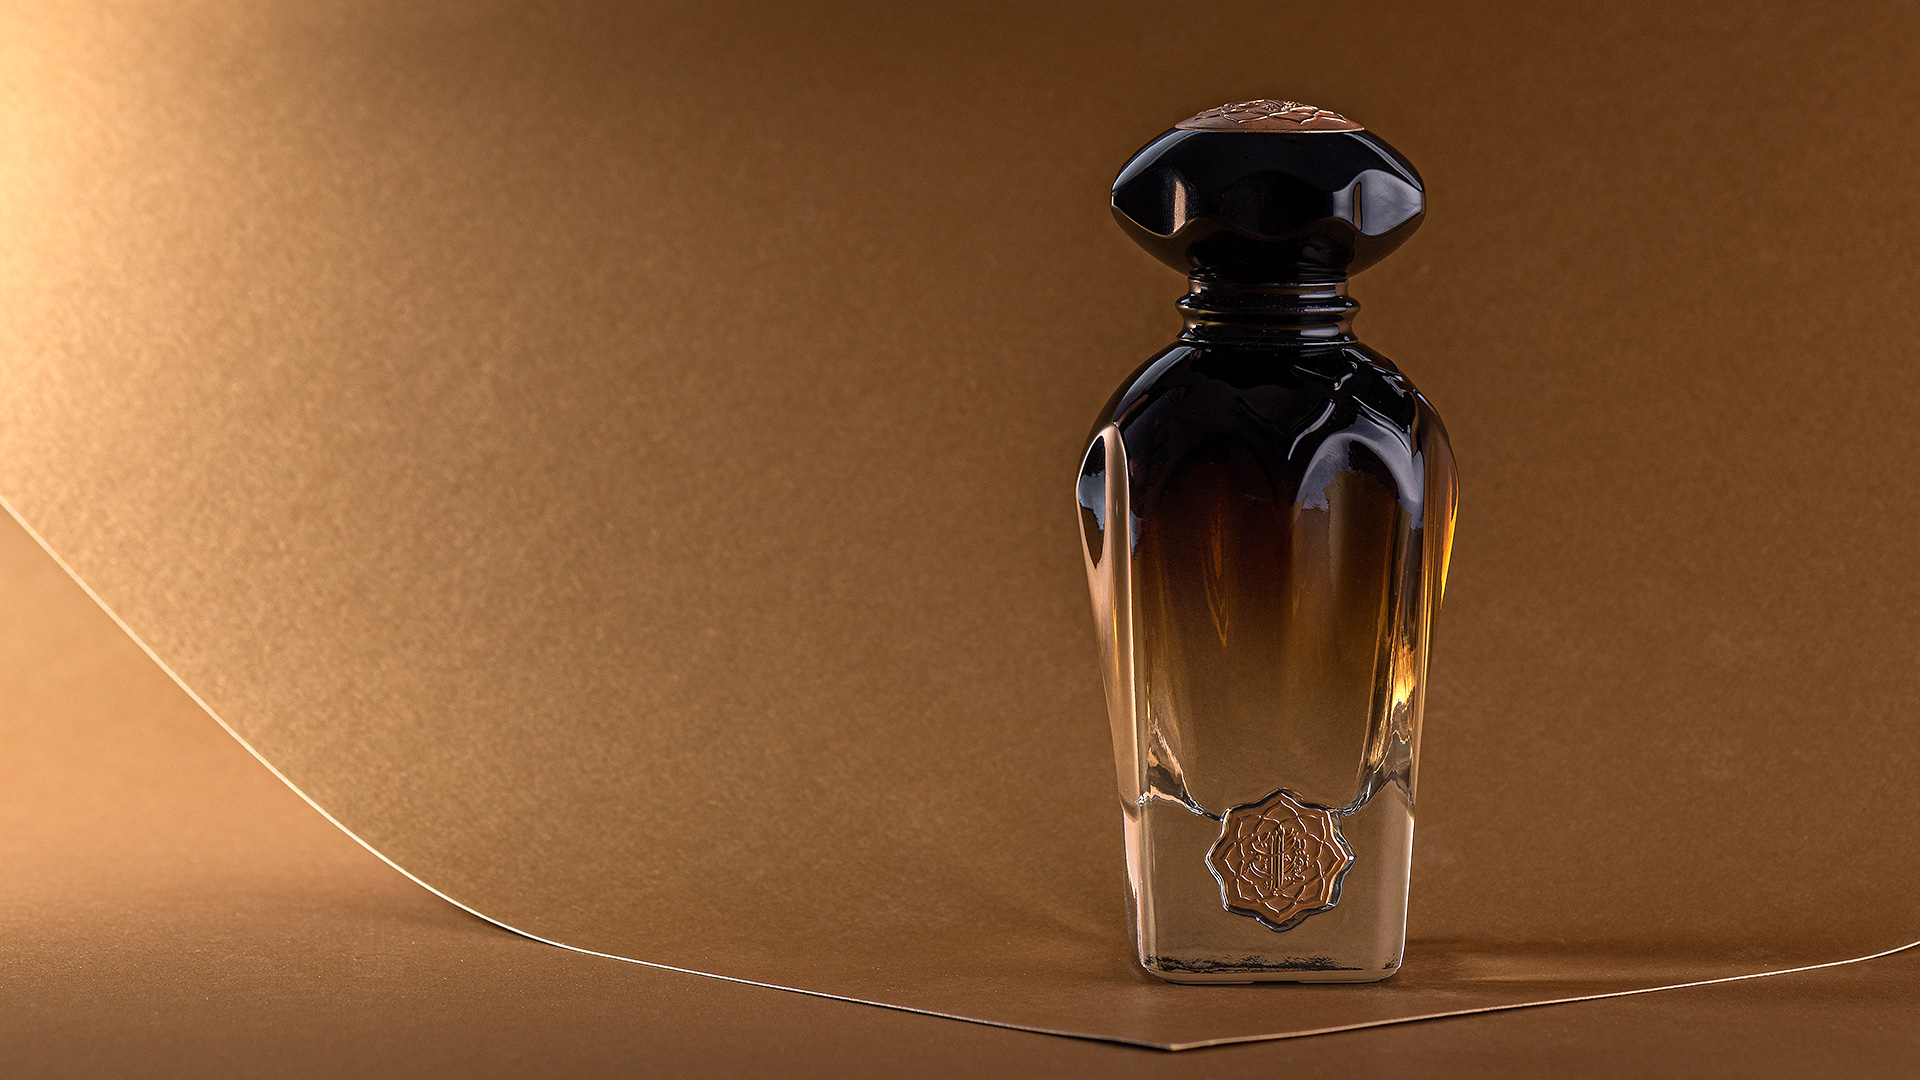 Express Yourself in a New Way with Our Unique Perfumes